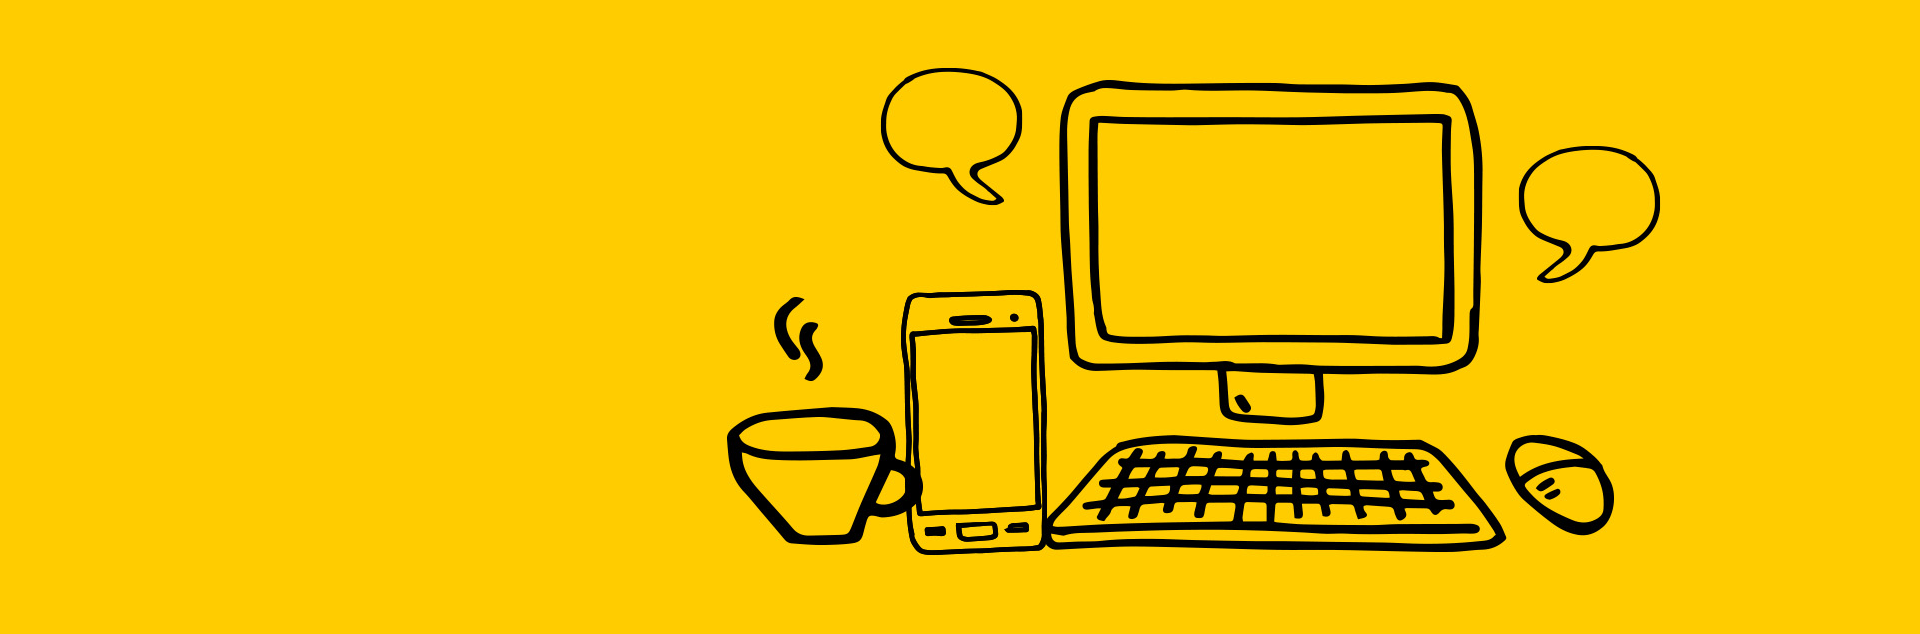 Yellow banner image with black doodles of computer screen, mobile phone, coffee cup and speech bubbles